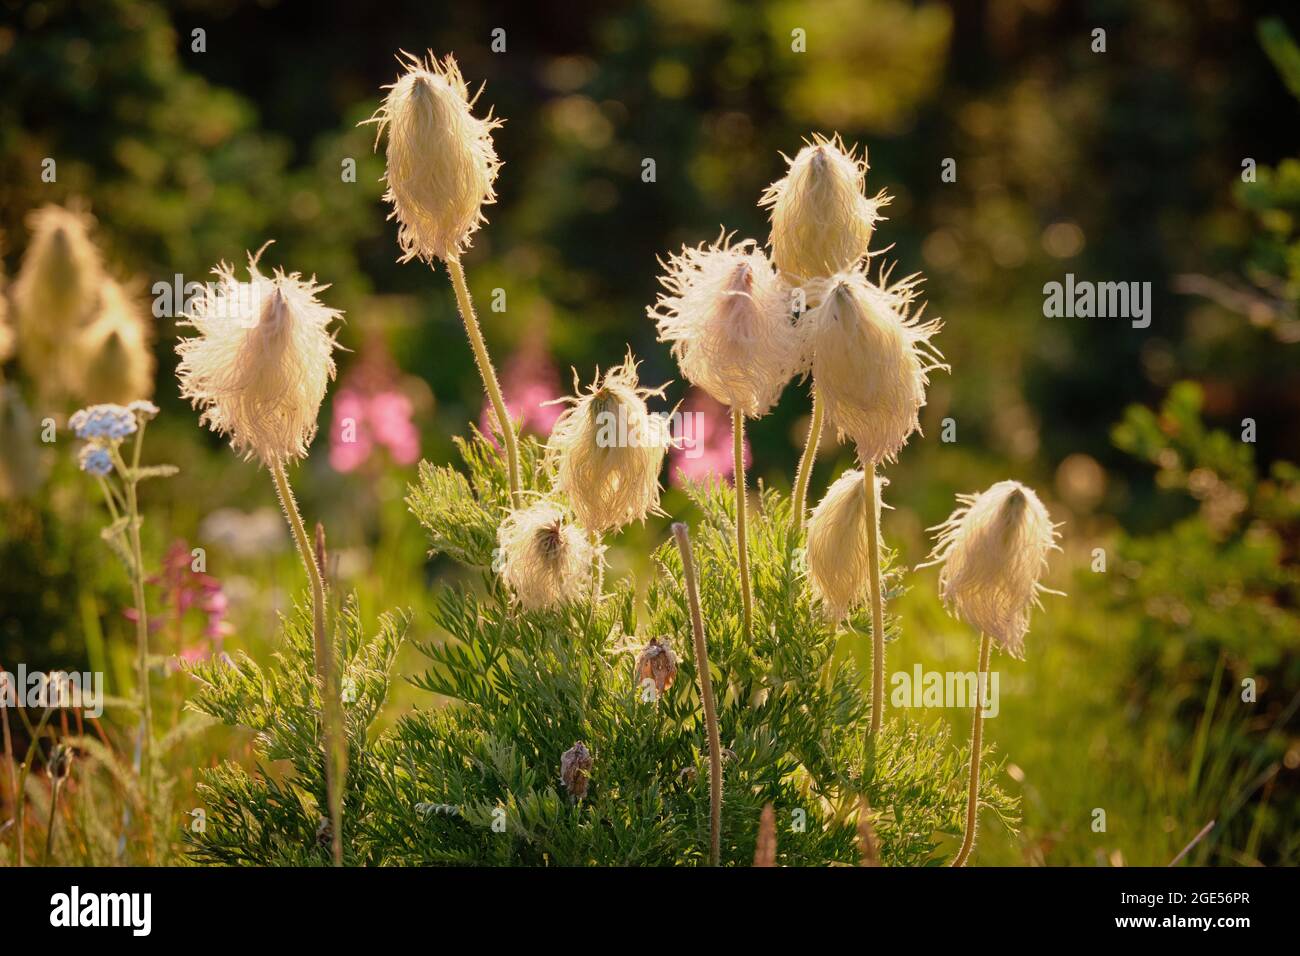 Tufted and hairy heads of Western Anemone or Mountain Pasque Flower, backlit by setting sun.  Manning Park, BC. Canada Stock Photo